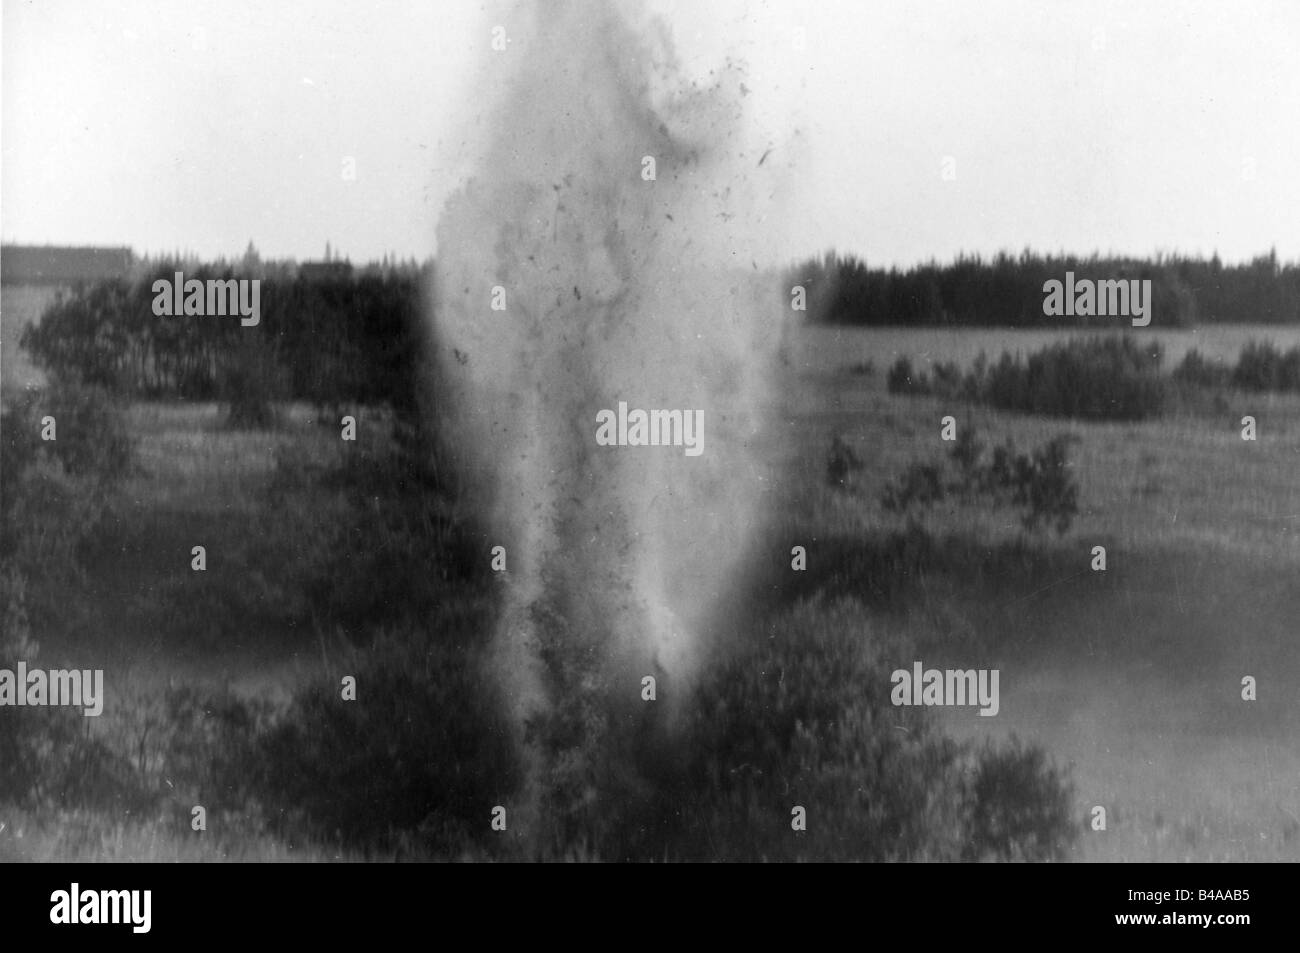 events, Second World War / WWII, Russia 1941, exploding hand grenade, 26.7.1941, , Stock Photo